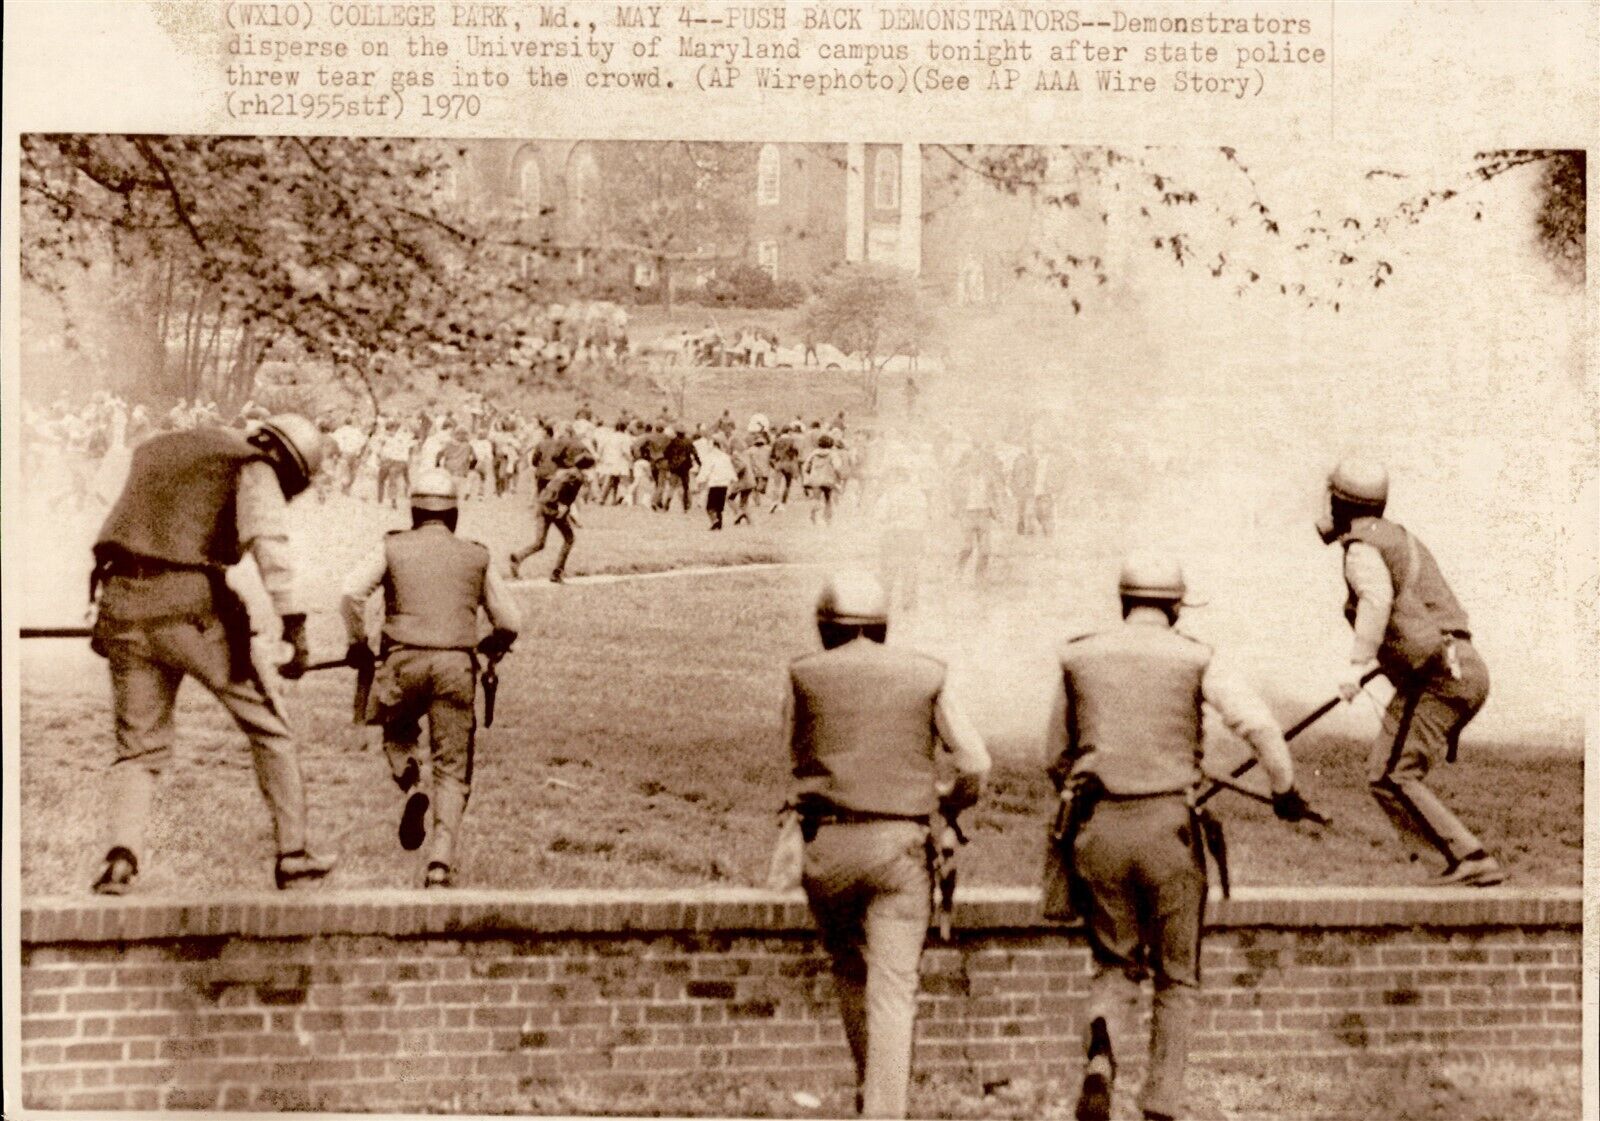 LG67 1970 AP Wire Photo UNIV MARYLAND STATE COPS TEAR GAS PROTEST DEMONSTRATORS